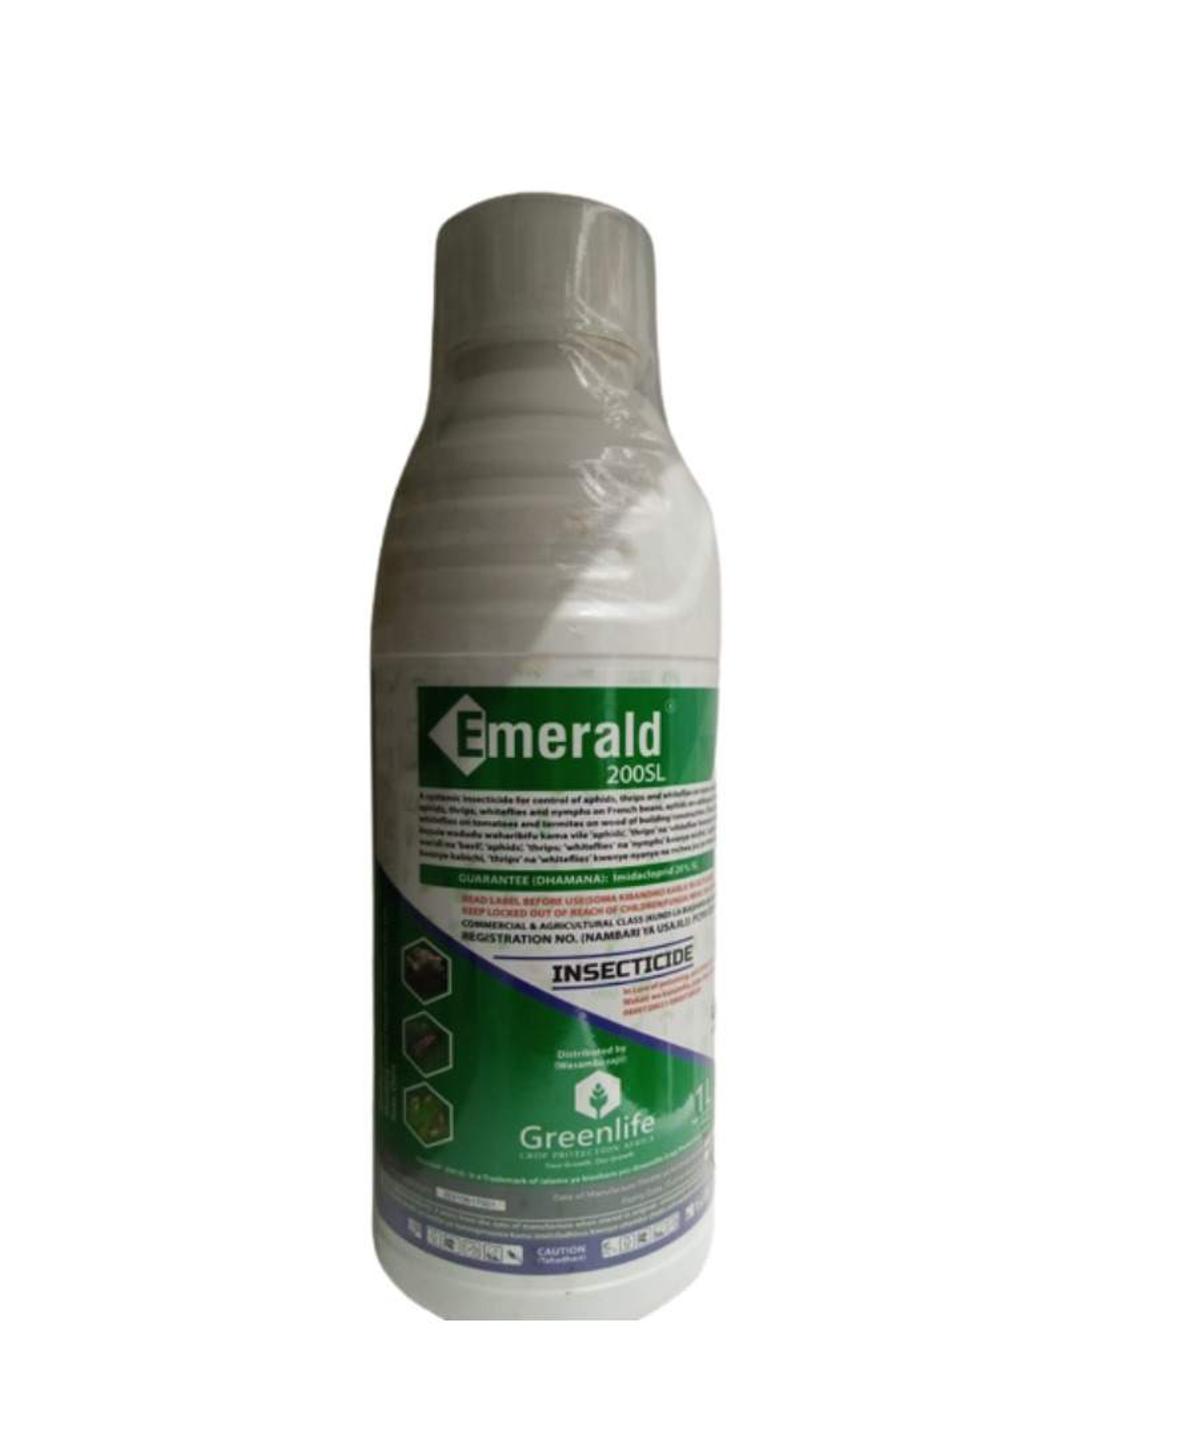 Insecticide products